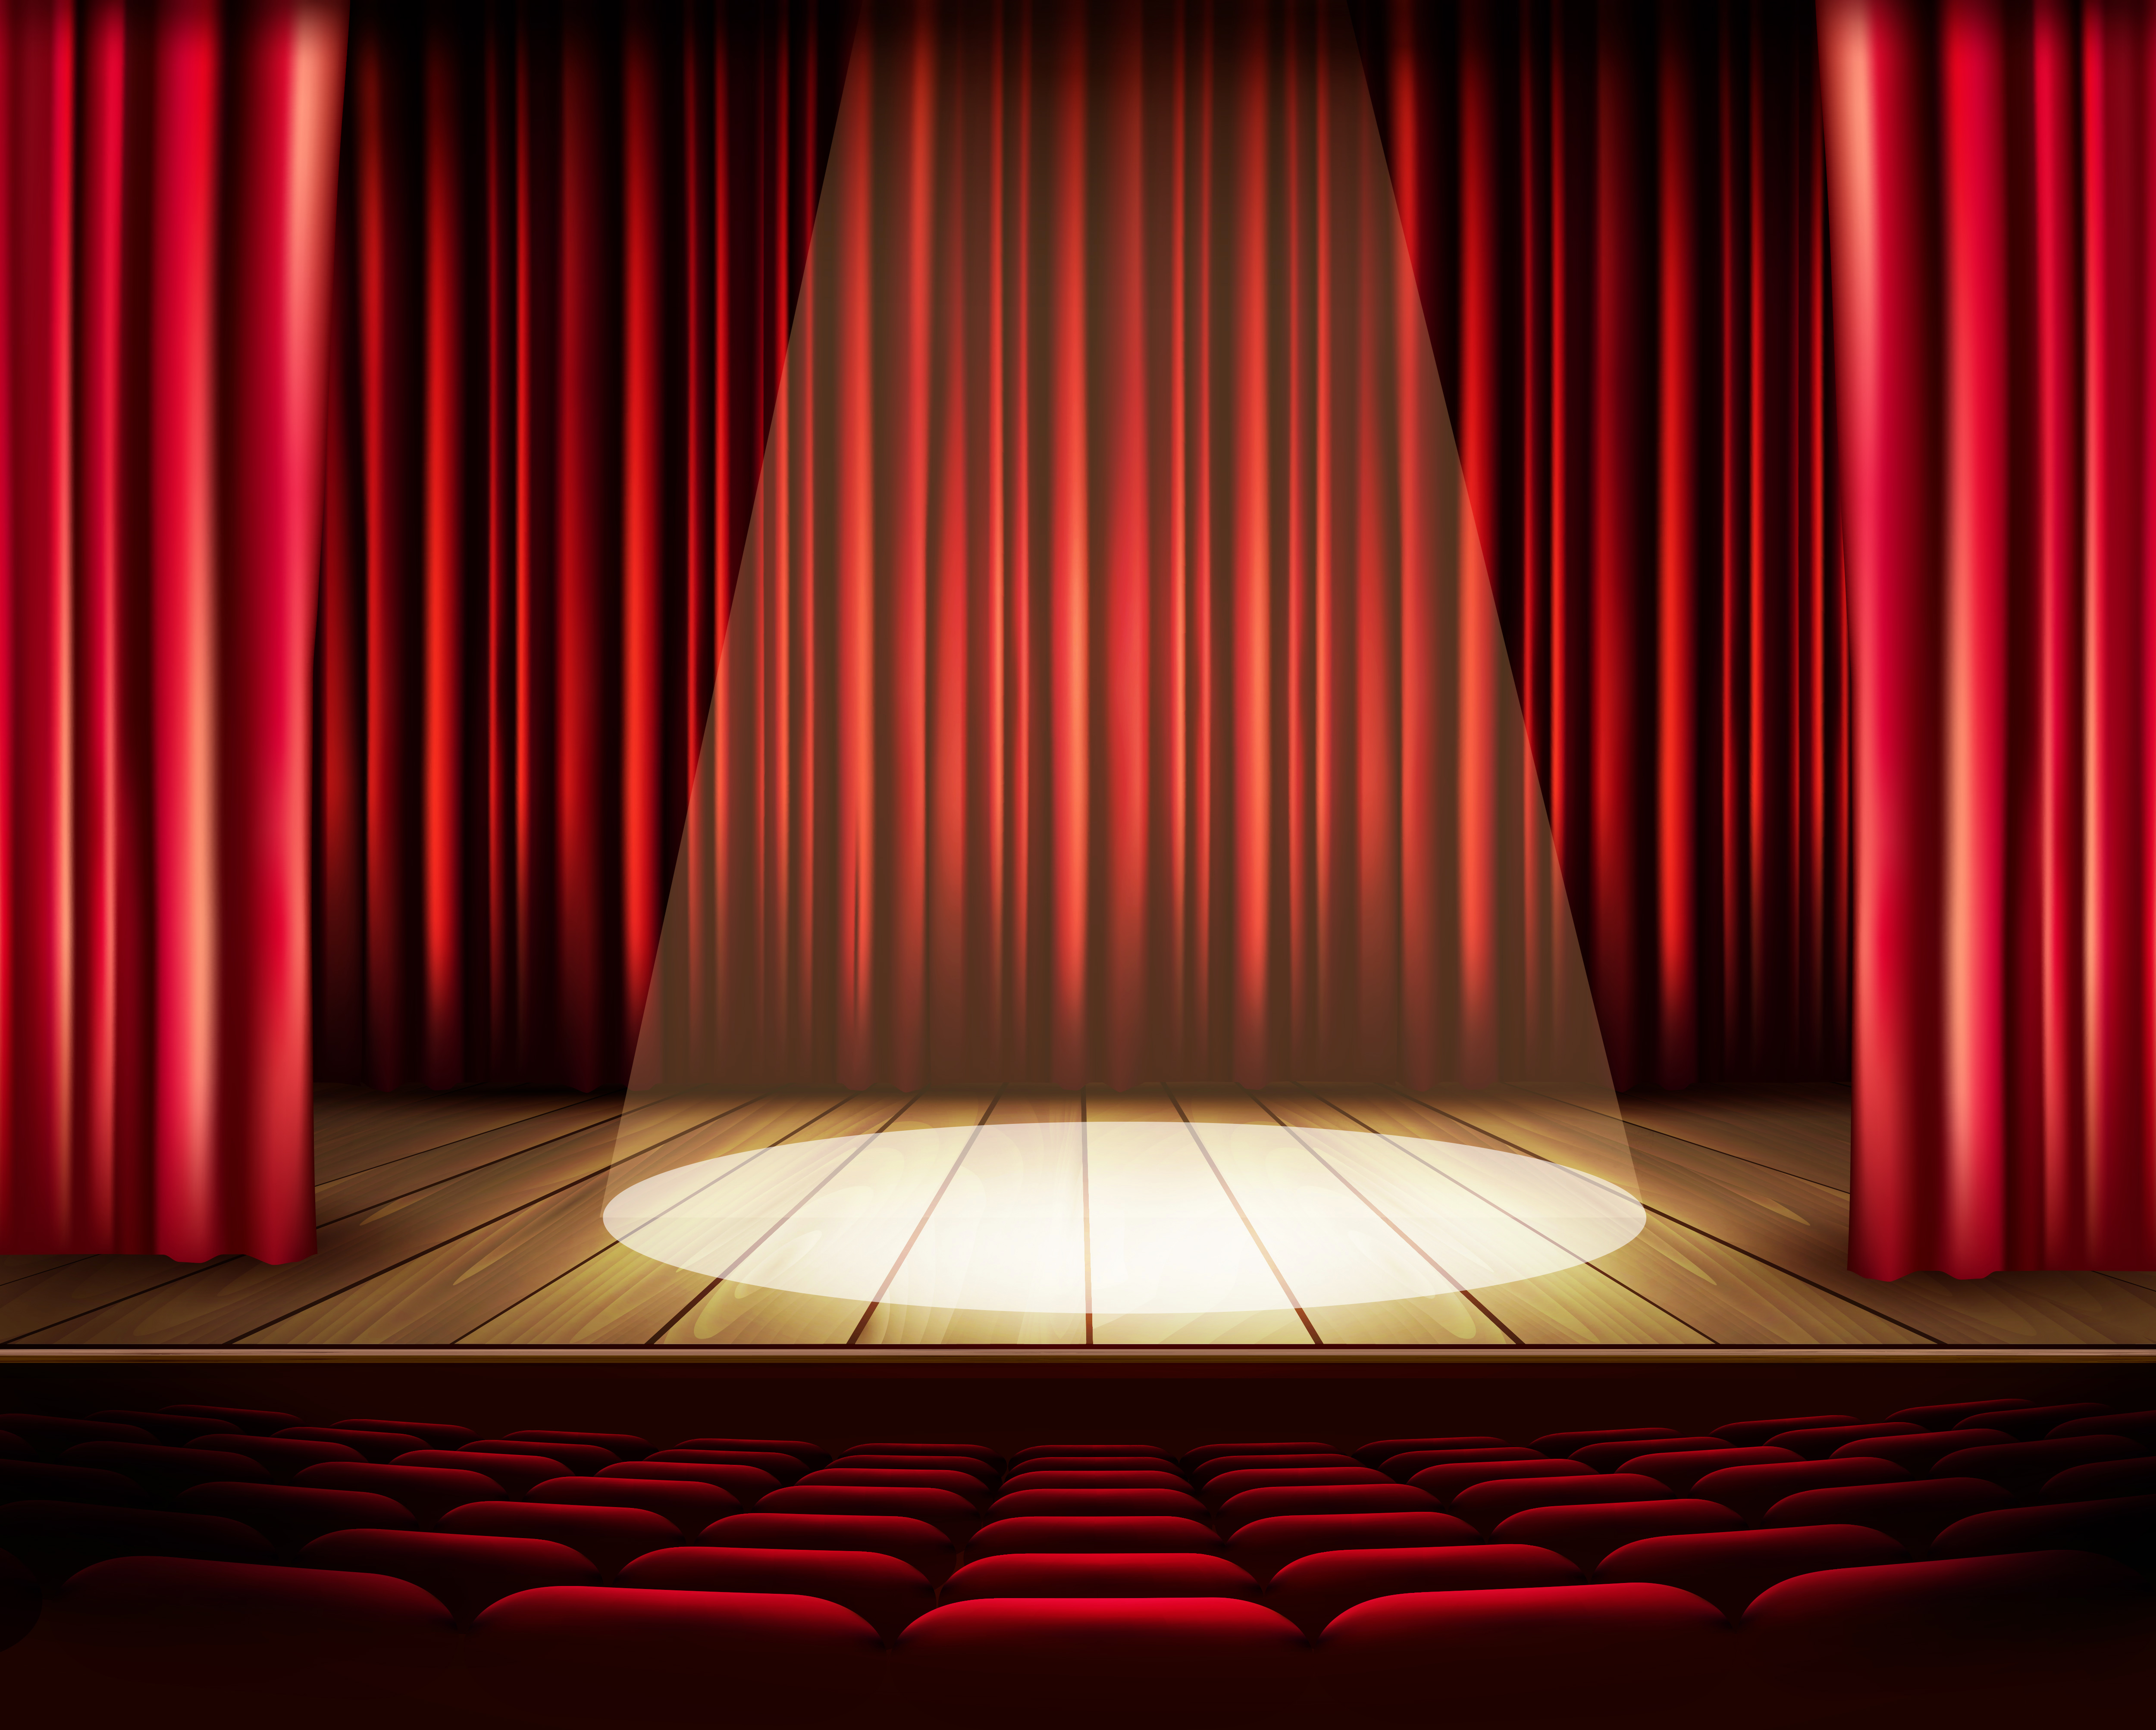 5368878 5472x3648 watching film audience sitting movie small cinema  person entertain watching theatre people Public domain images red  movie theatre cinema velvet  Rare Gallery HD Wallpapers